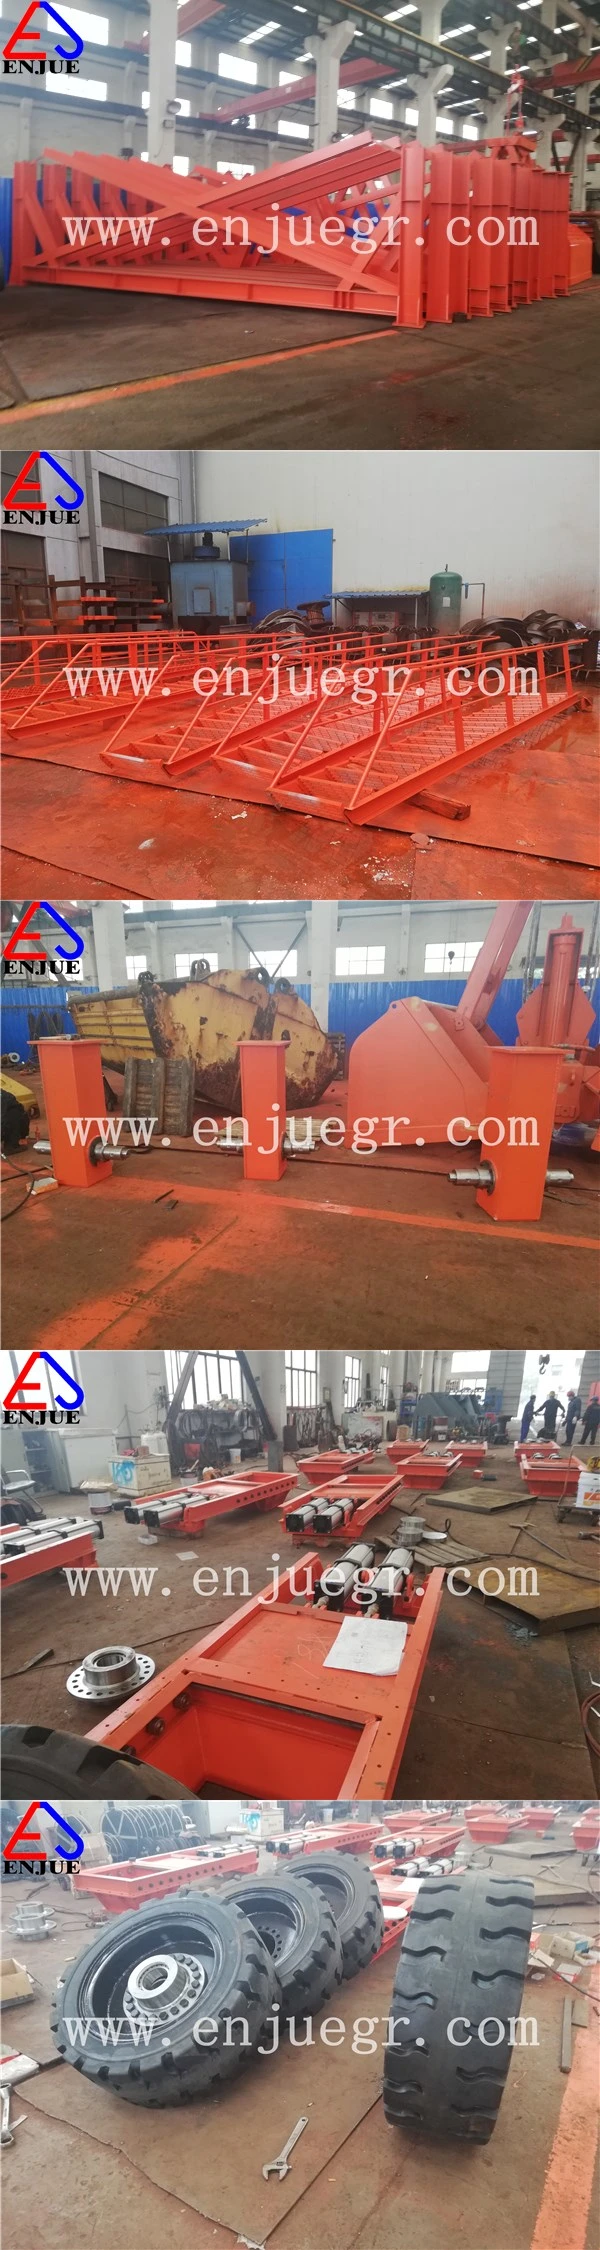 Enjue Tyre Mounted Truck Loading Hopper with Dust Control System